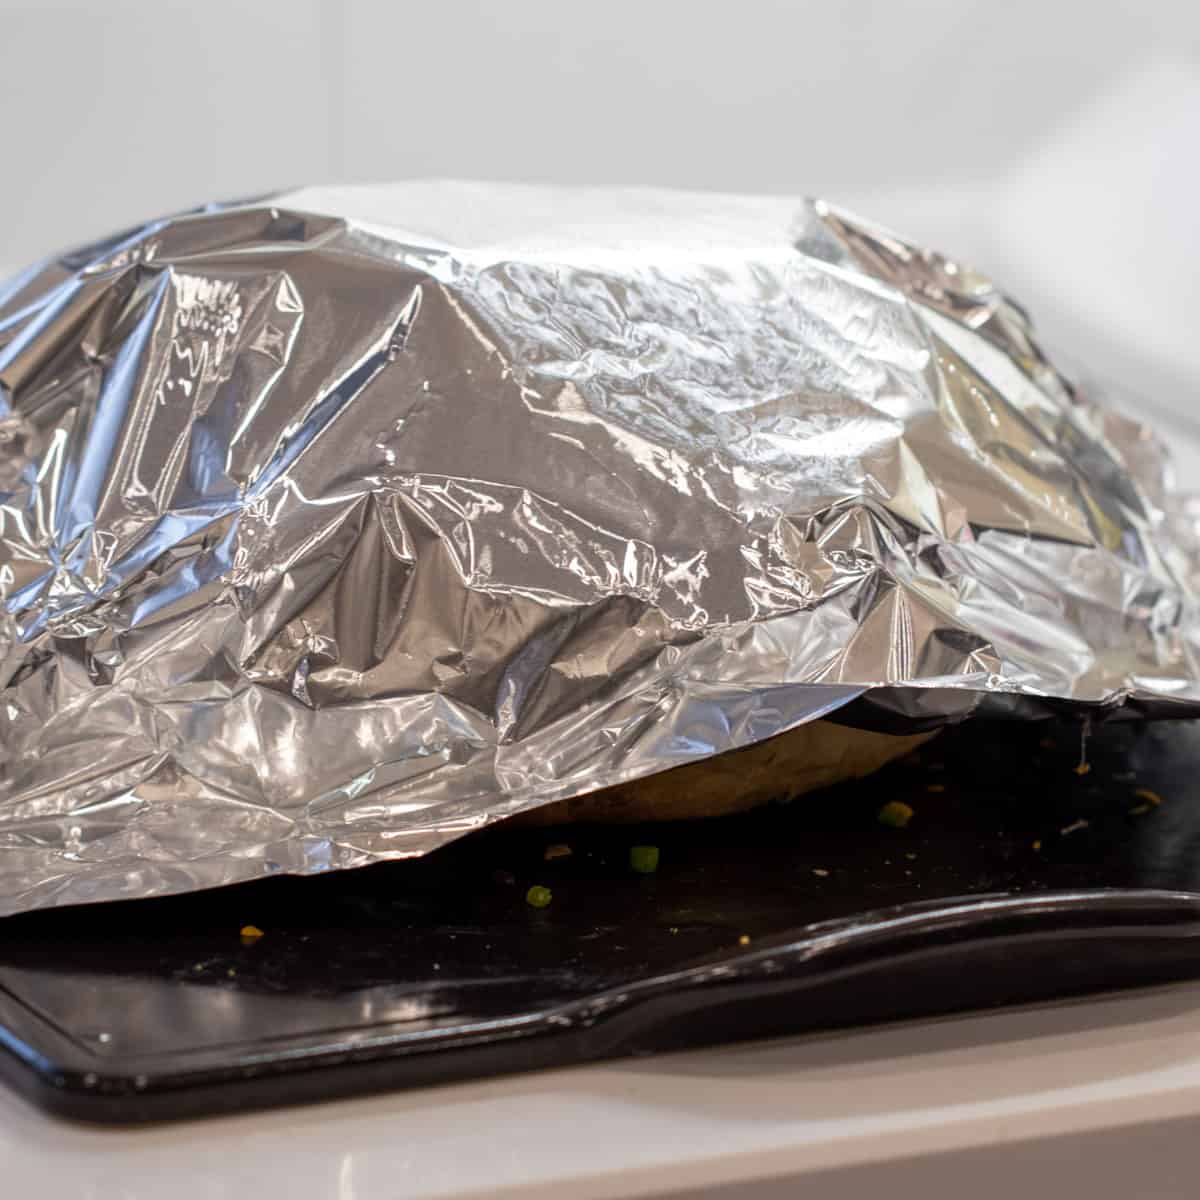 Aluminum foil covering a loaf of bread on a baking stone.